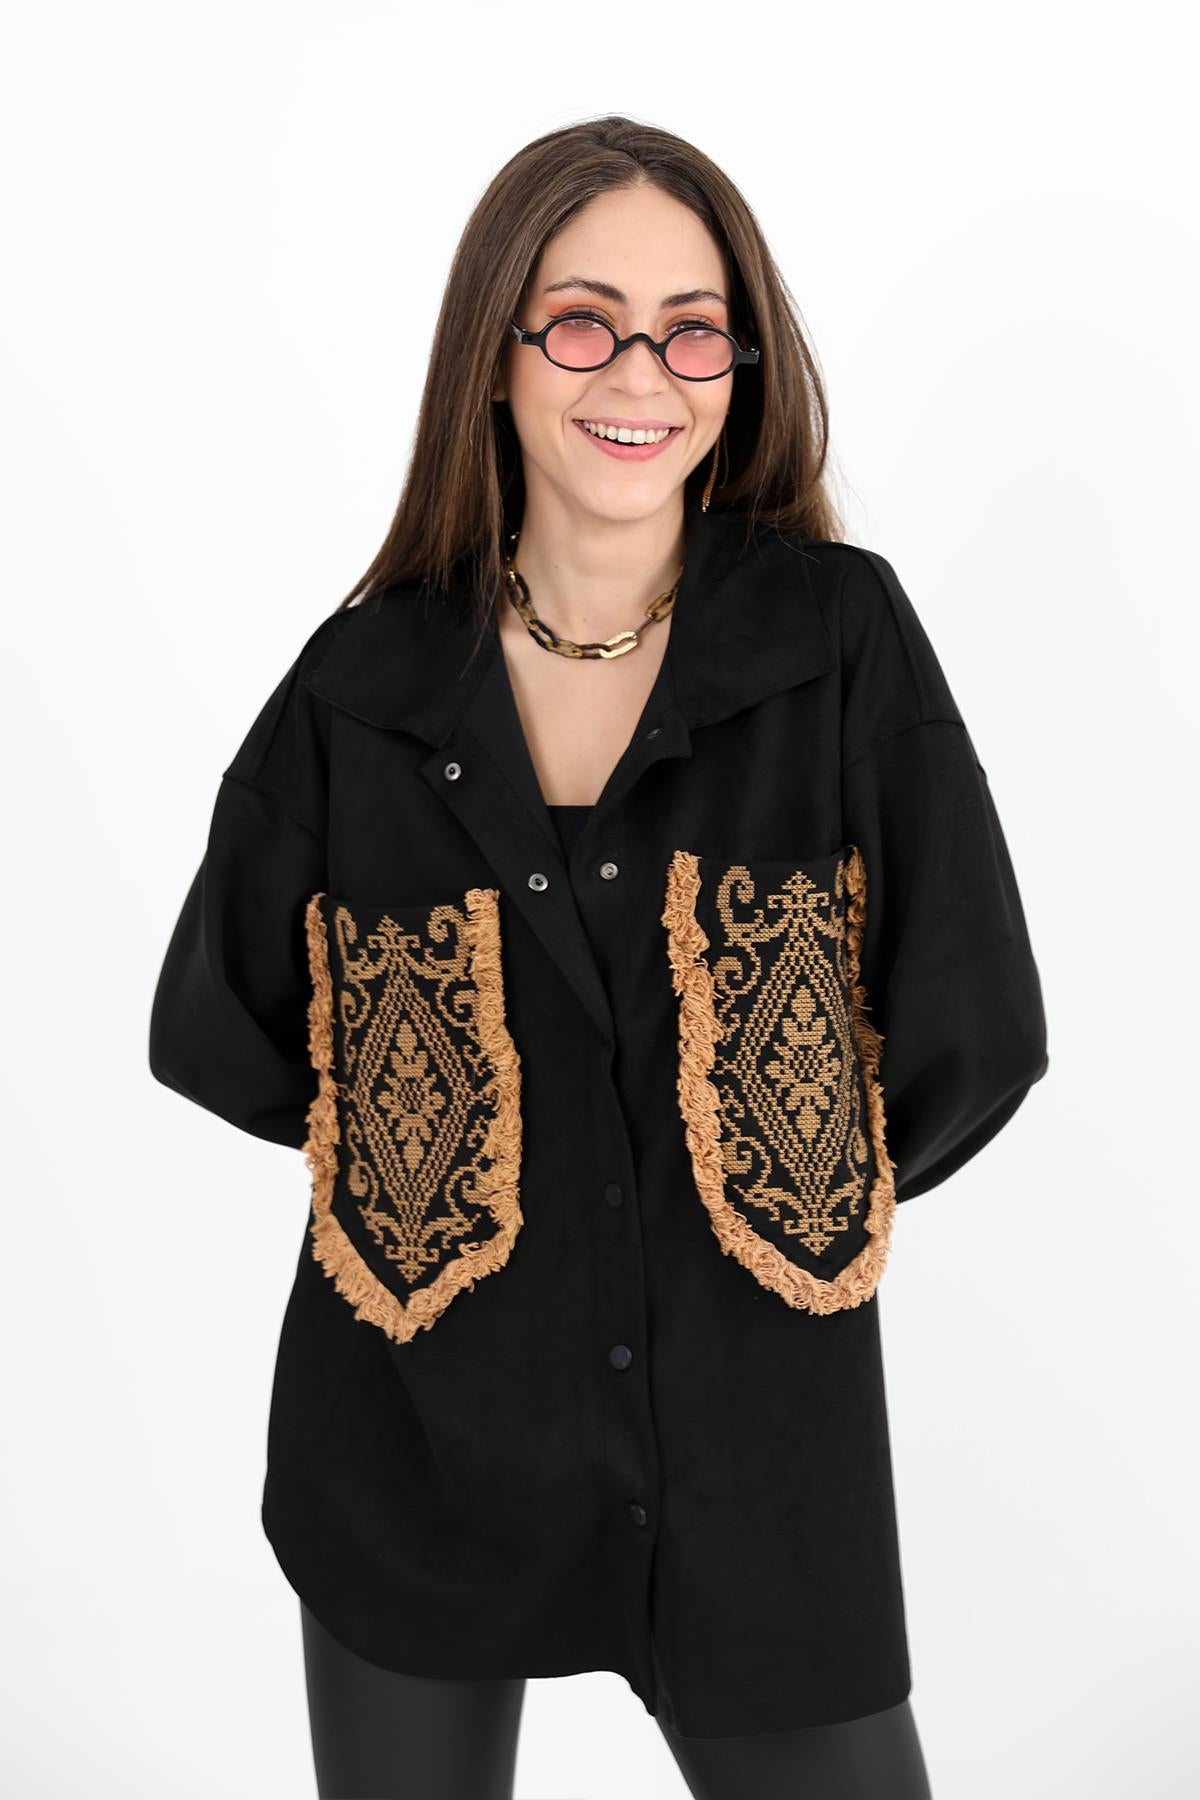 Women's Shirt Pocket Tasseled Embroidered Suede - Black - STREETMODE ™